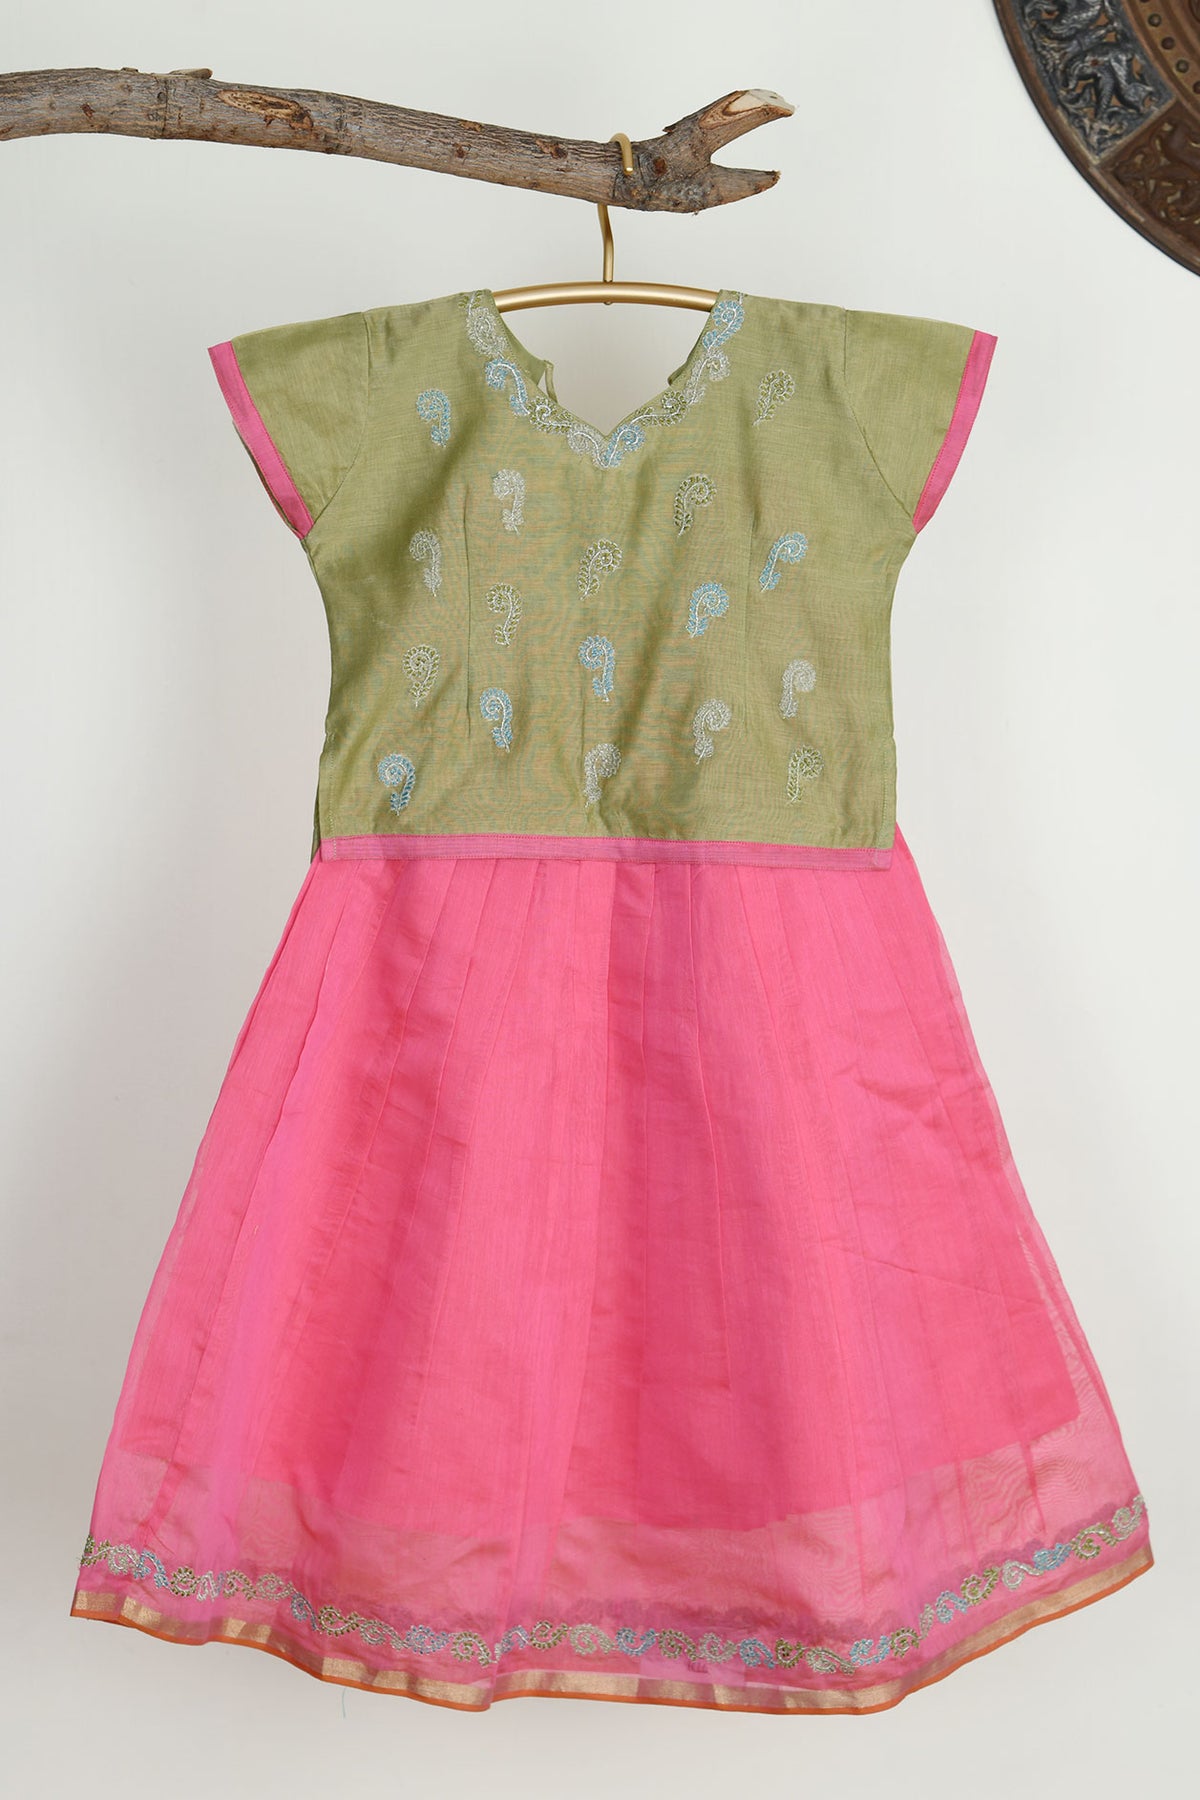 V-Neck Back Tie-Up Embroidered Sage Green And Pink Chanderi Cotton Pavadai Sattai